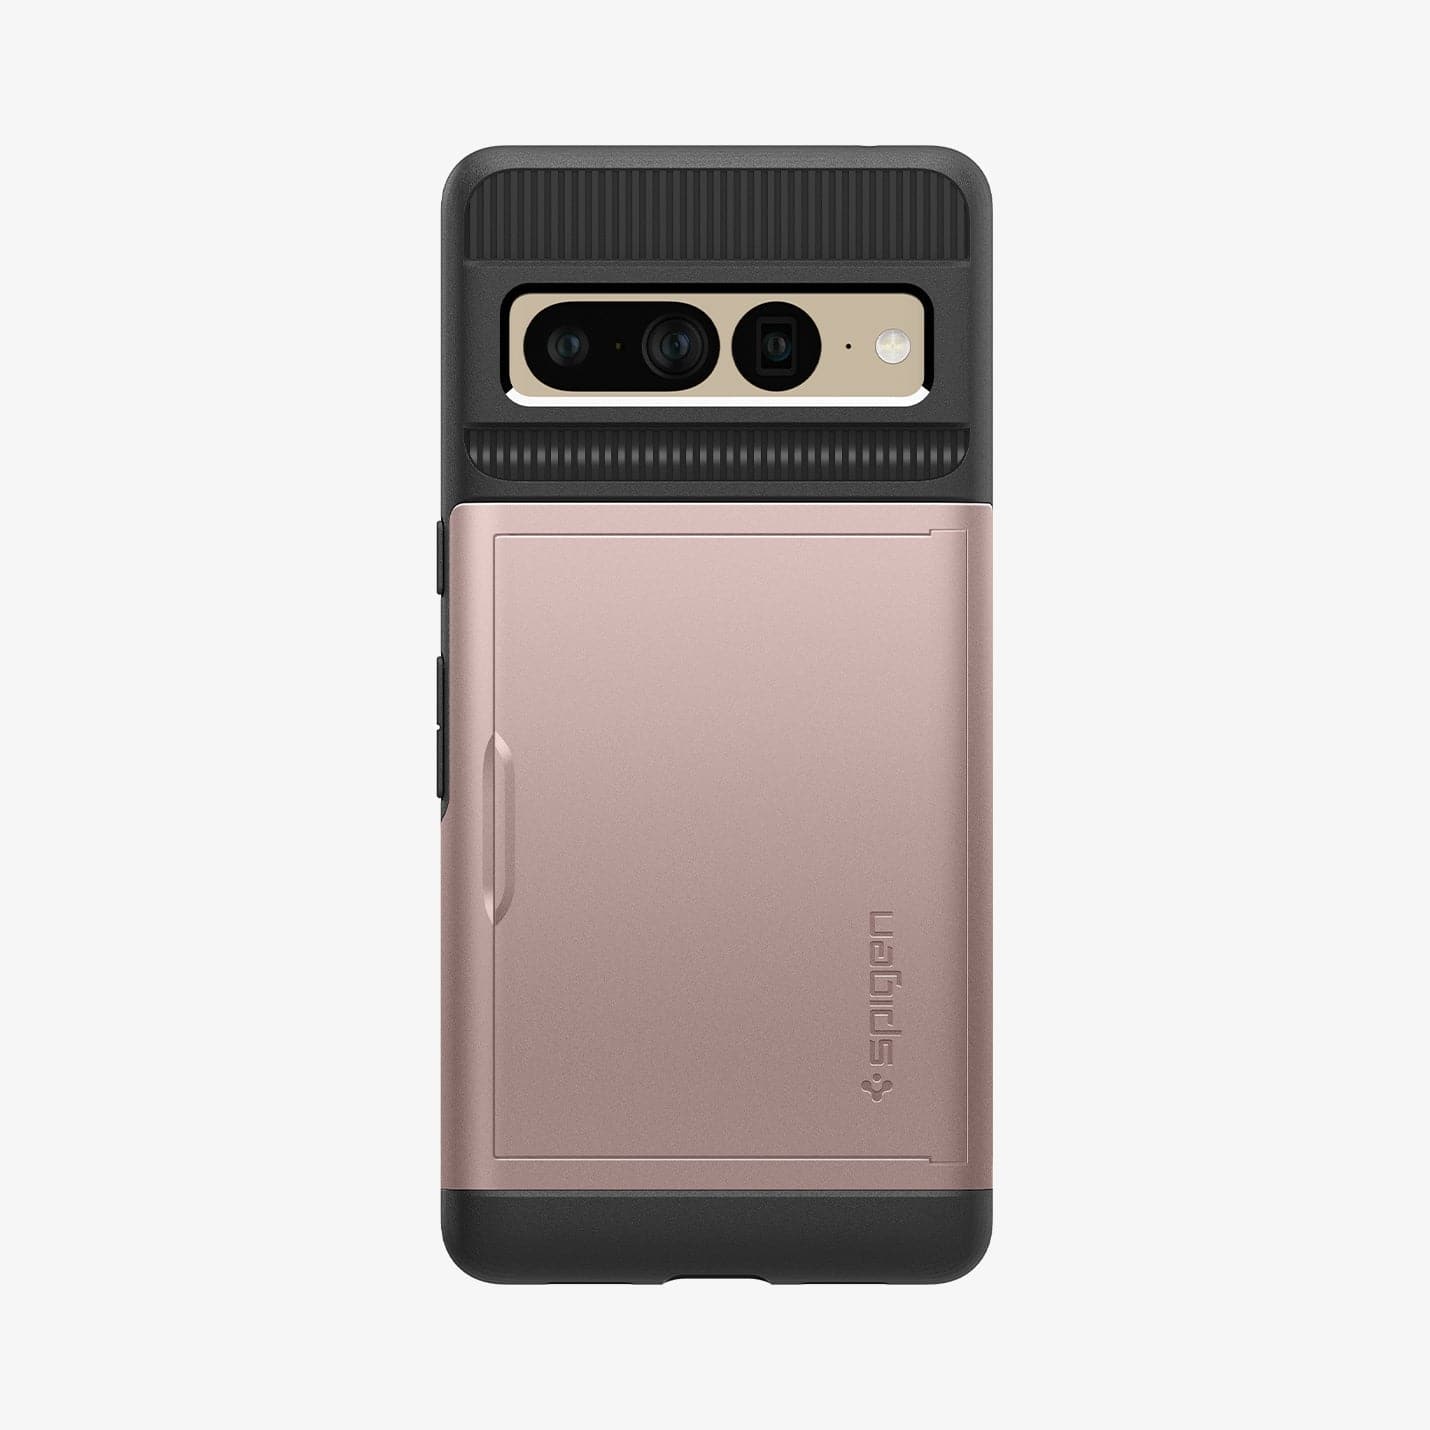 ACS04732 - Pixel 7 Pro Case Slim Armor CS in rose gold showing the back